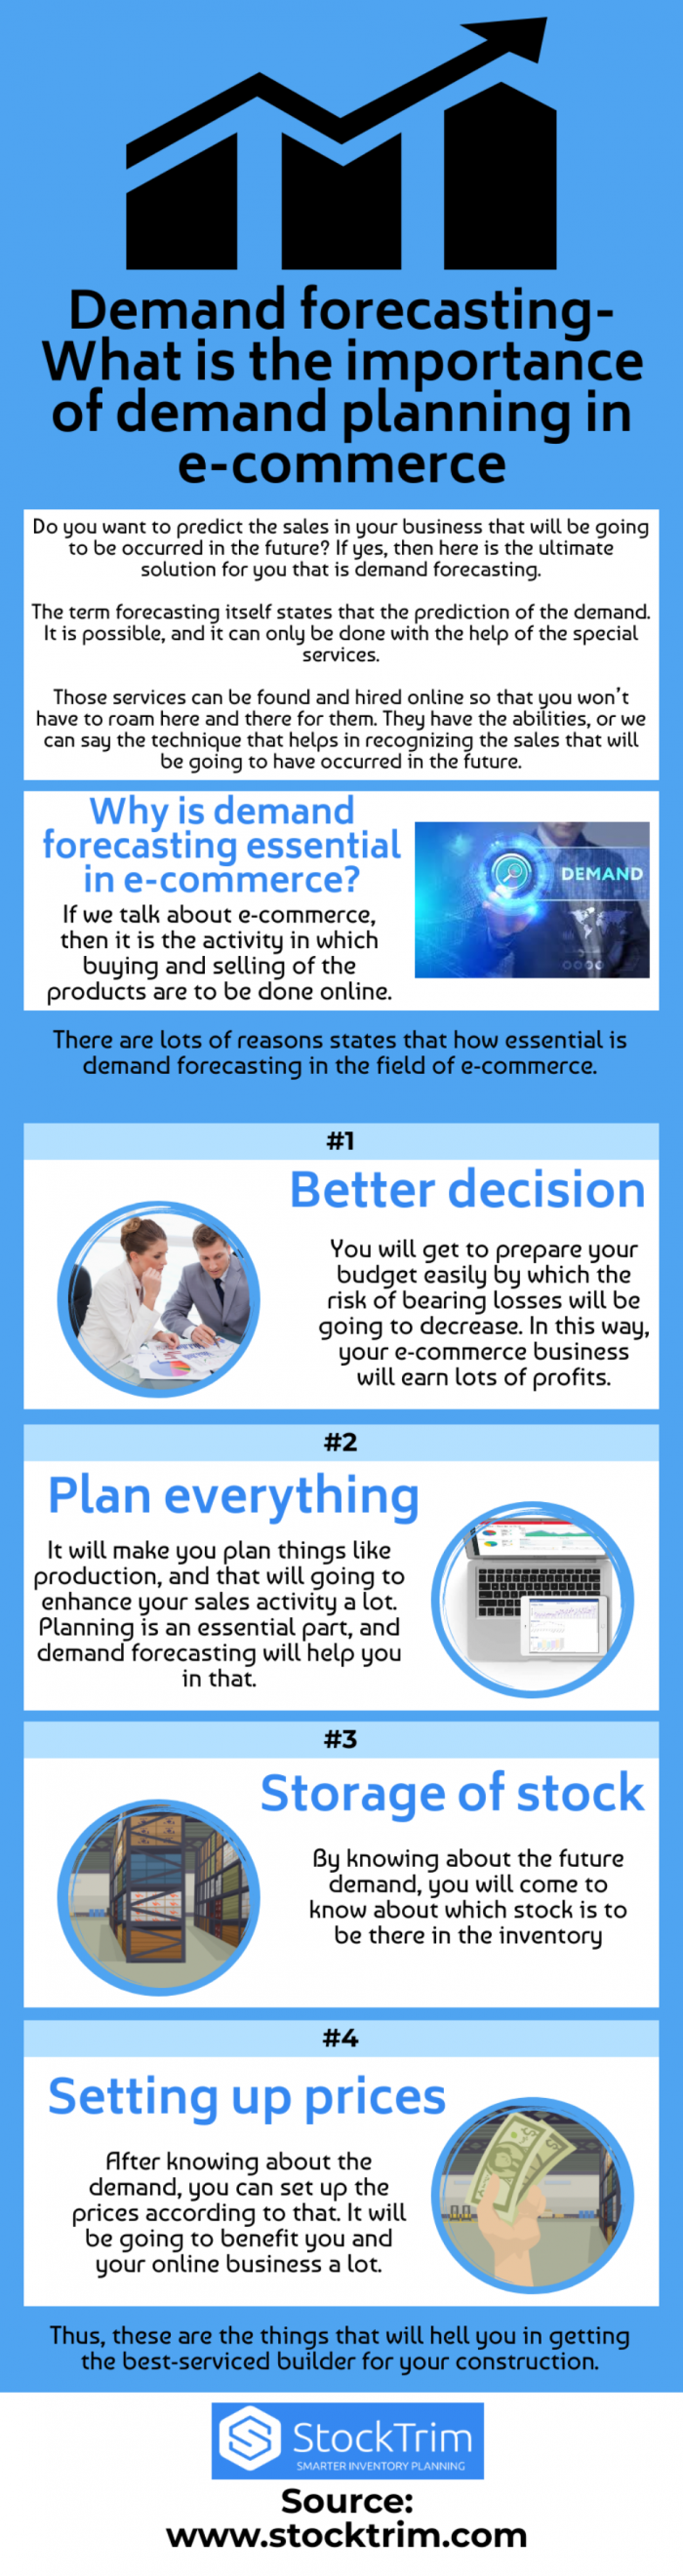 Demand forecasting-Benefits for the growth of your business